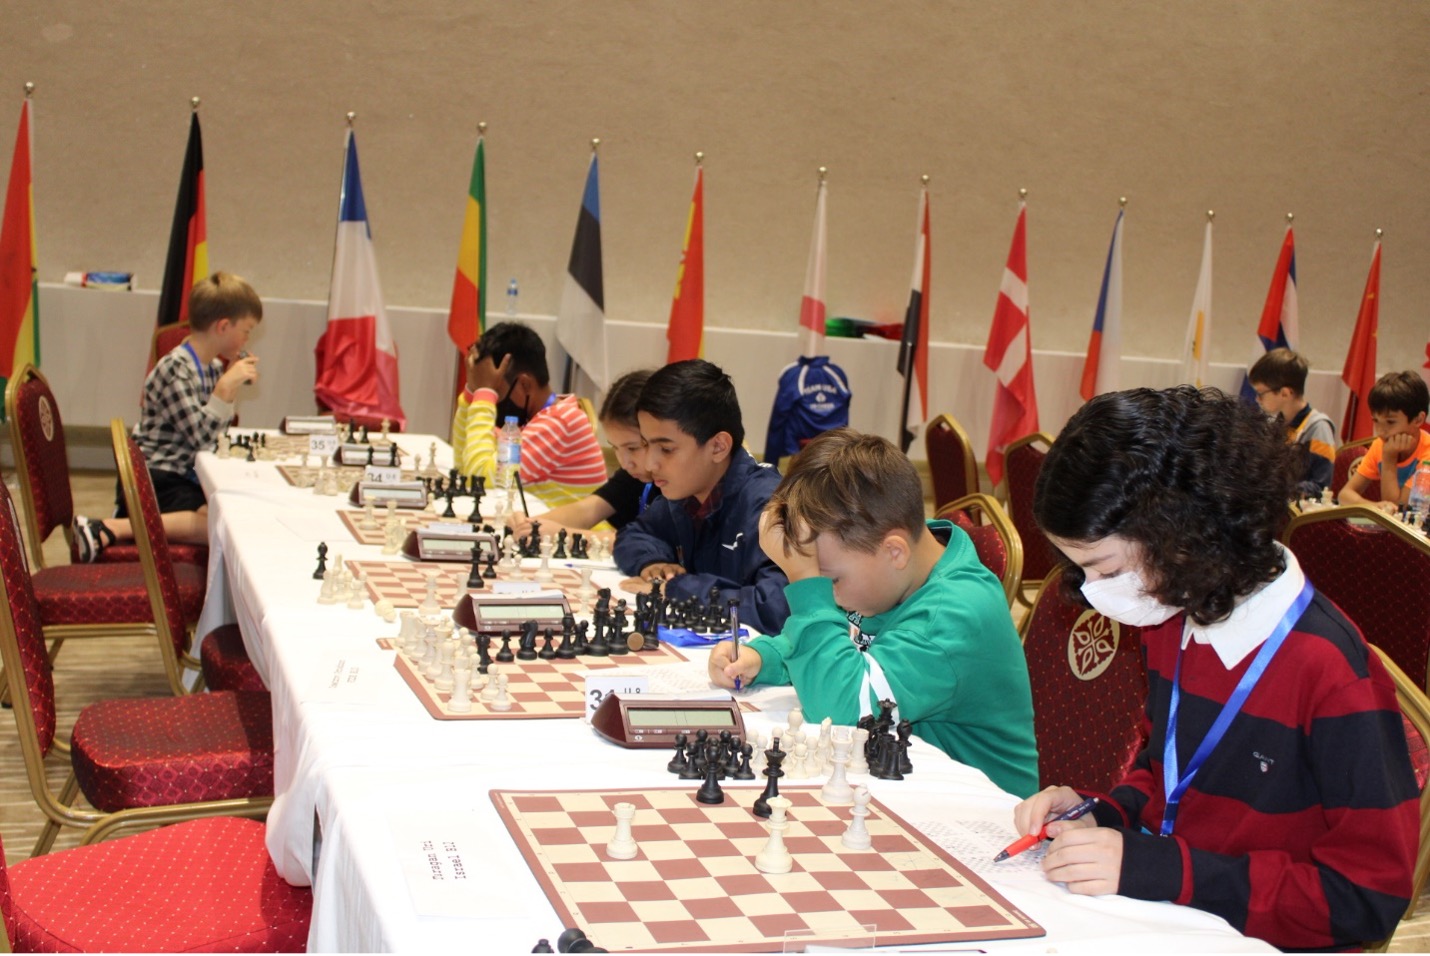 International Chess Federation on Twitter "The free day of the FIDE